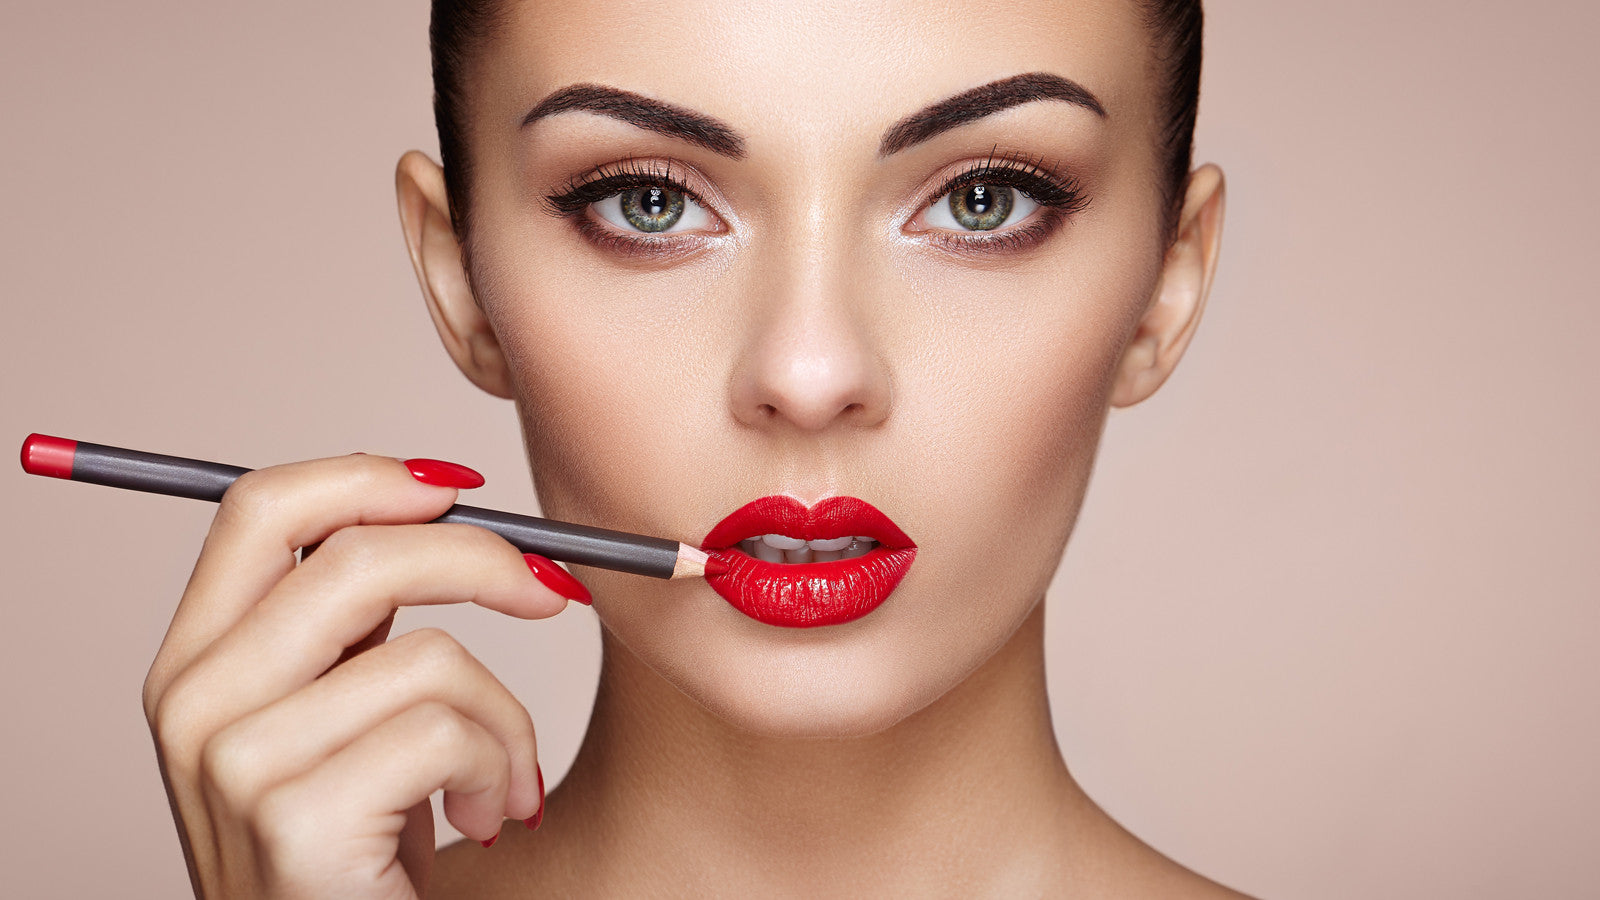 Top 10 colors for the best lipstick